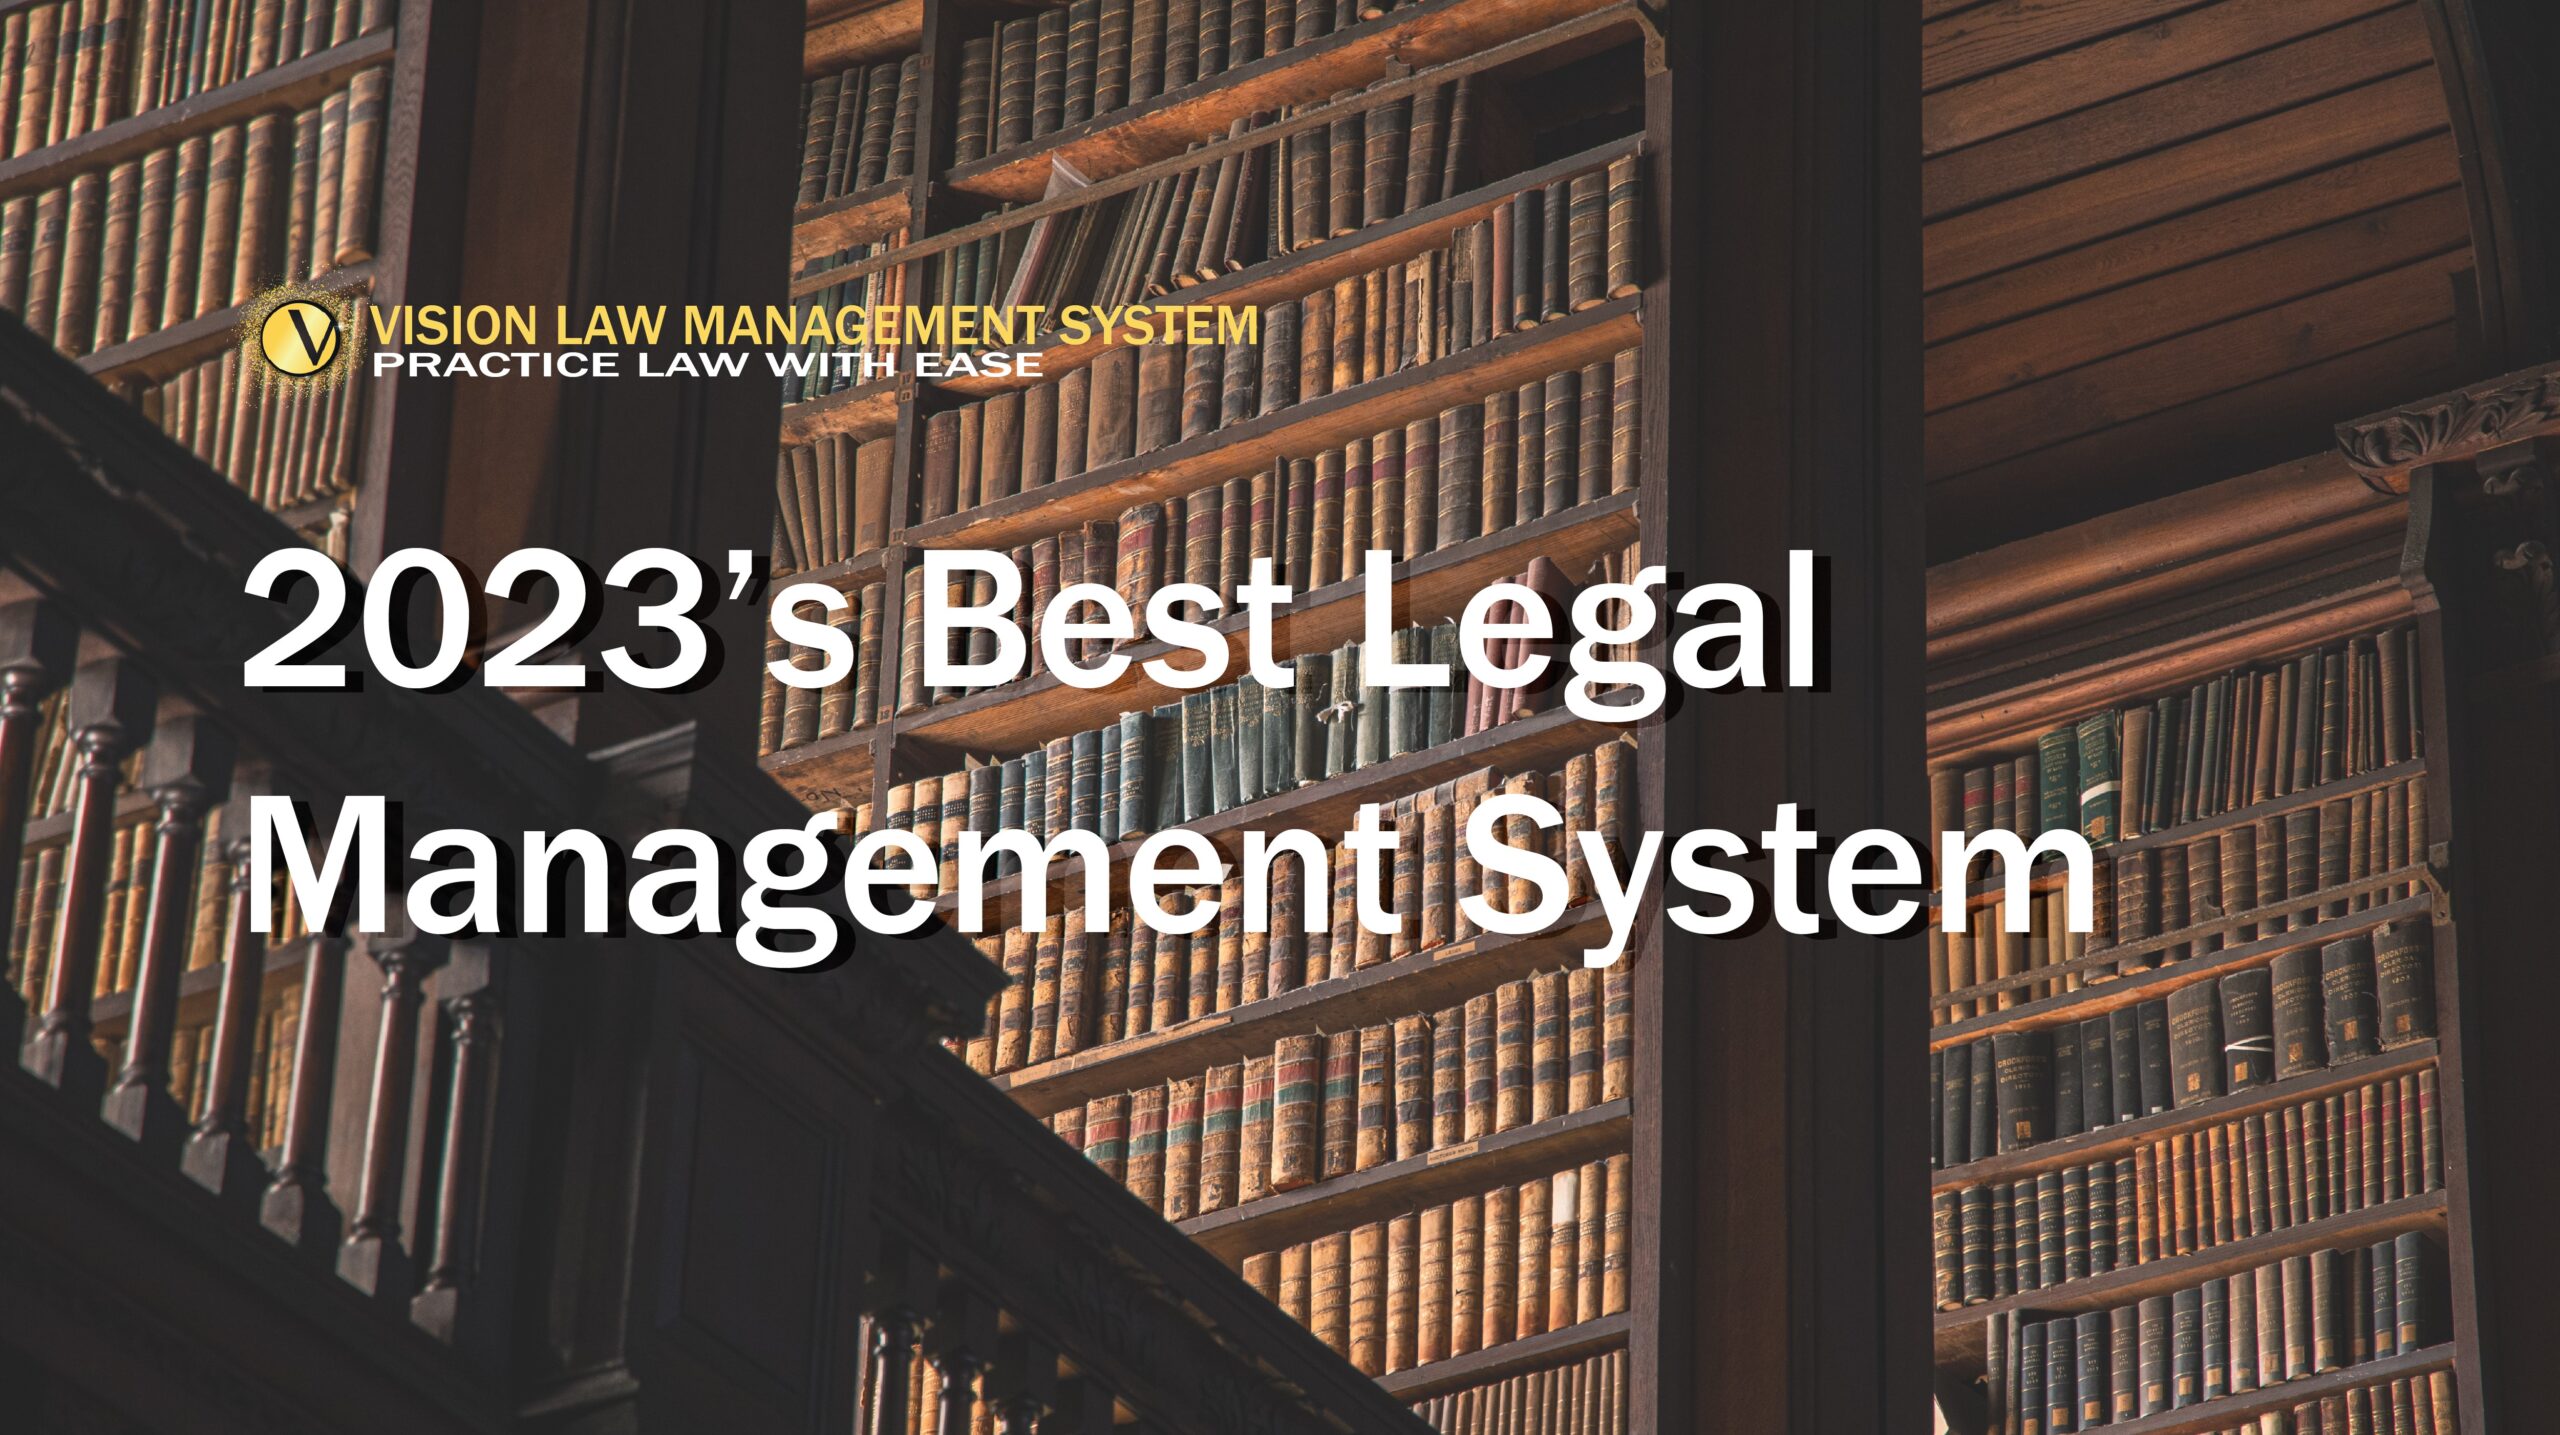 best legal management system abu dhabi uae dubai law software attorney mobile application desktop ios android offices lawyers advocates attorneys